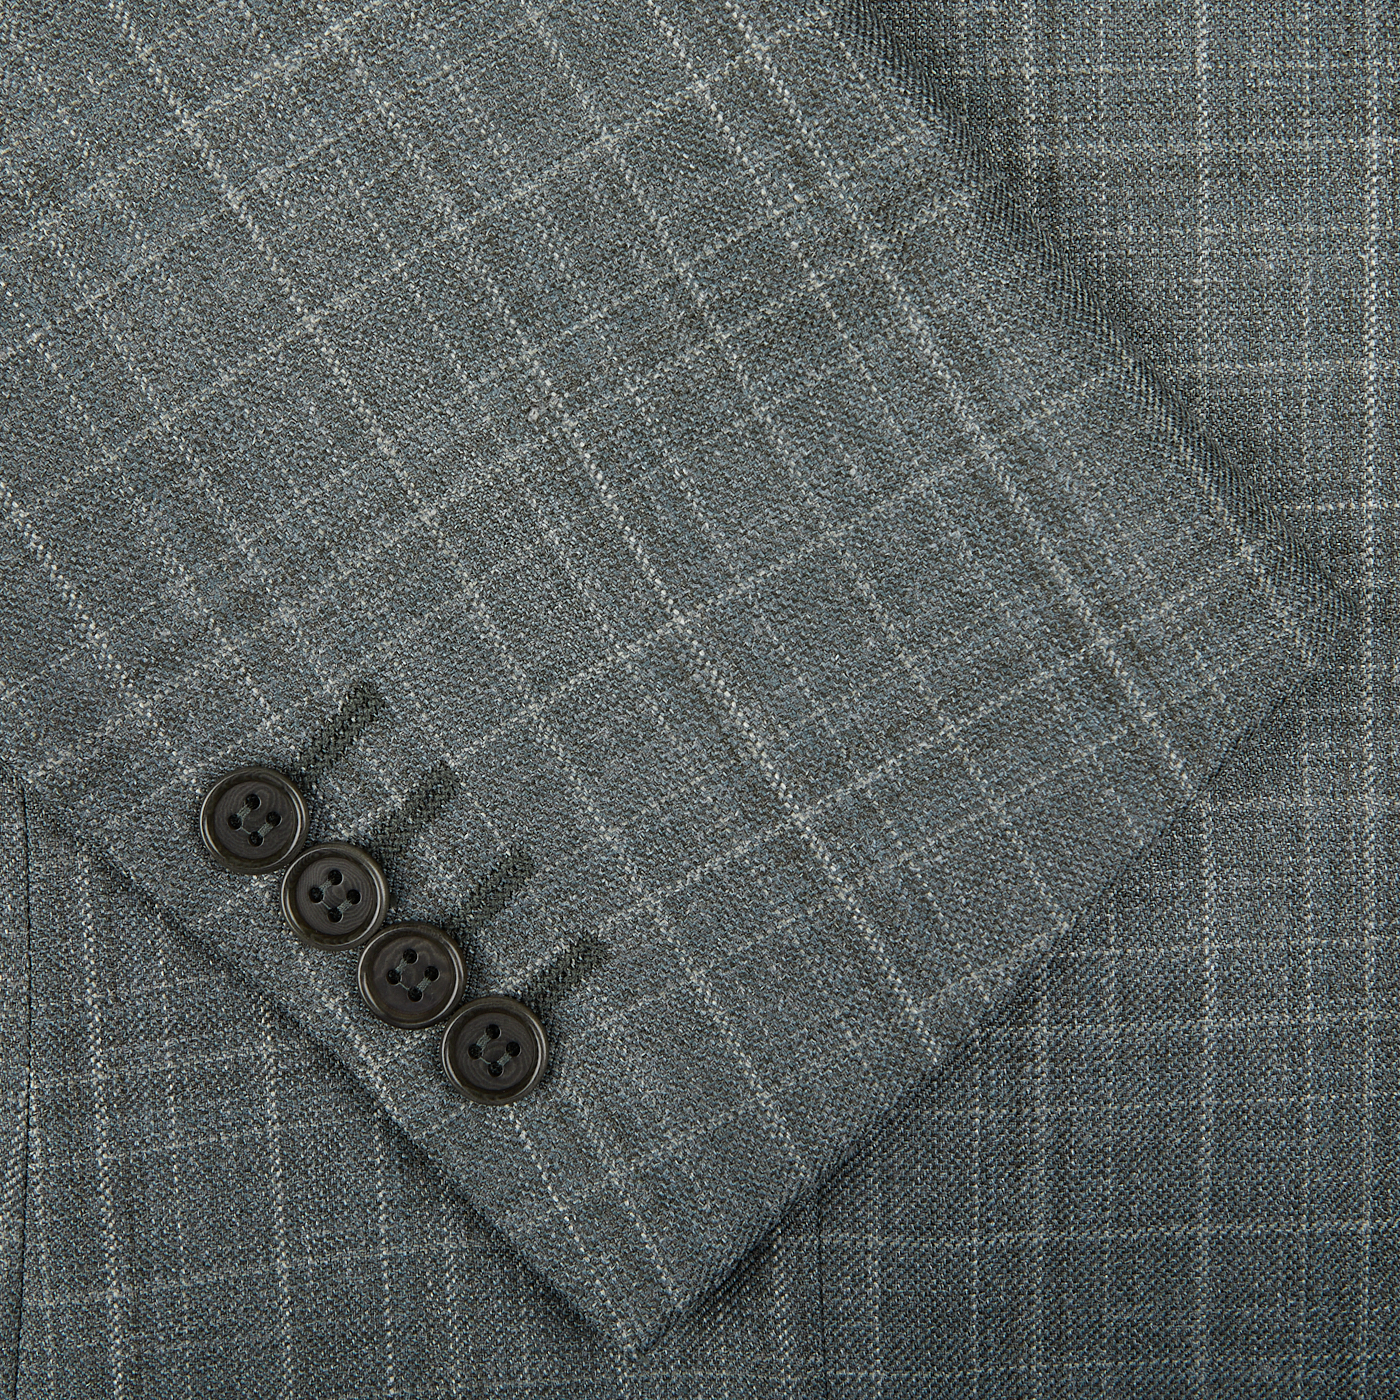 Close-up of a Canali green checked wool silk linen blazer fabric with a focus on three dark buttons, showcasing the texture and pattern of the material.